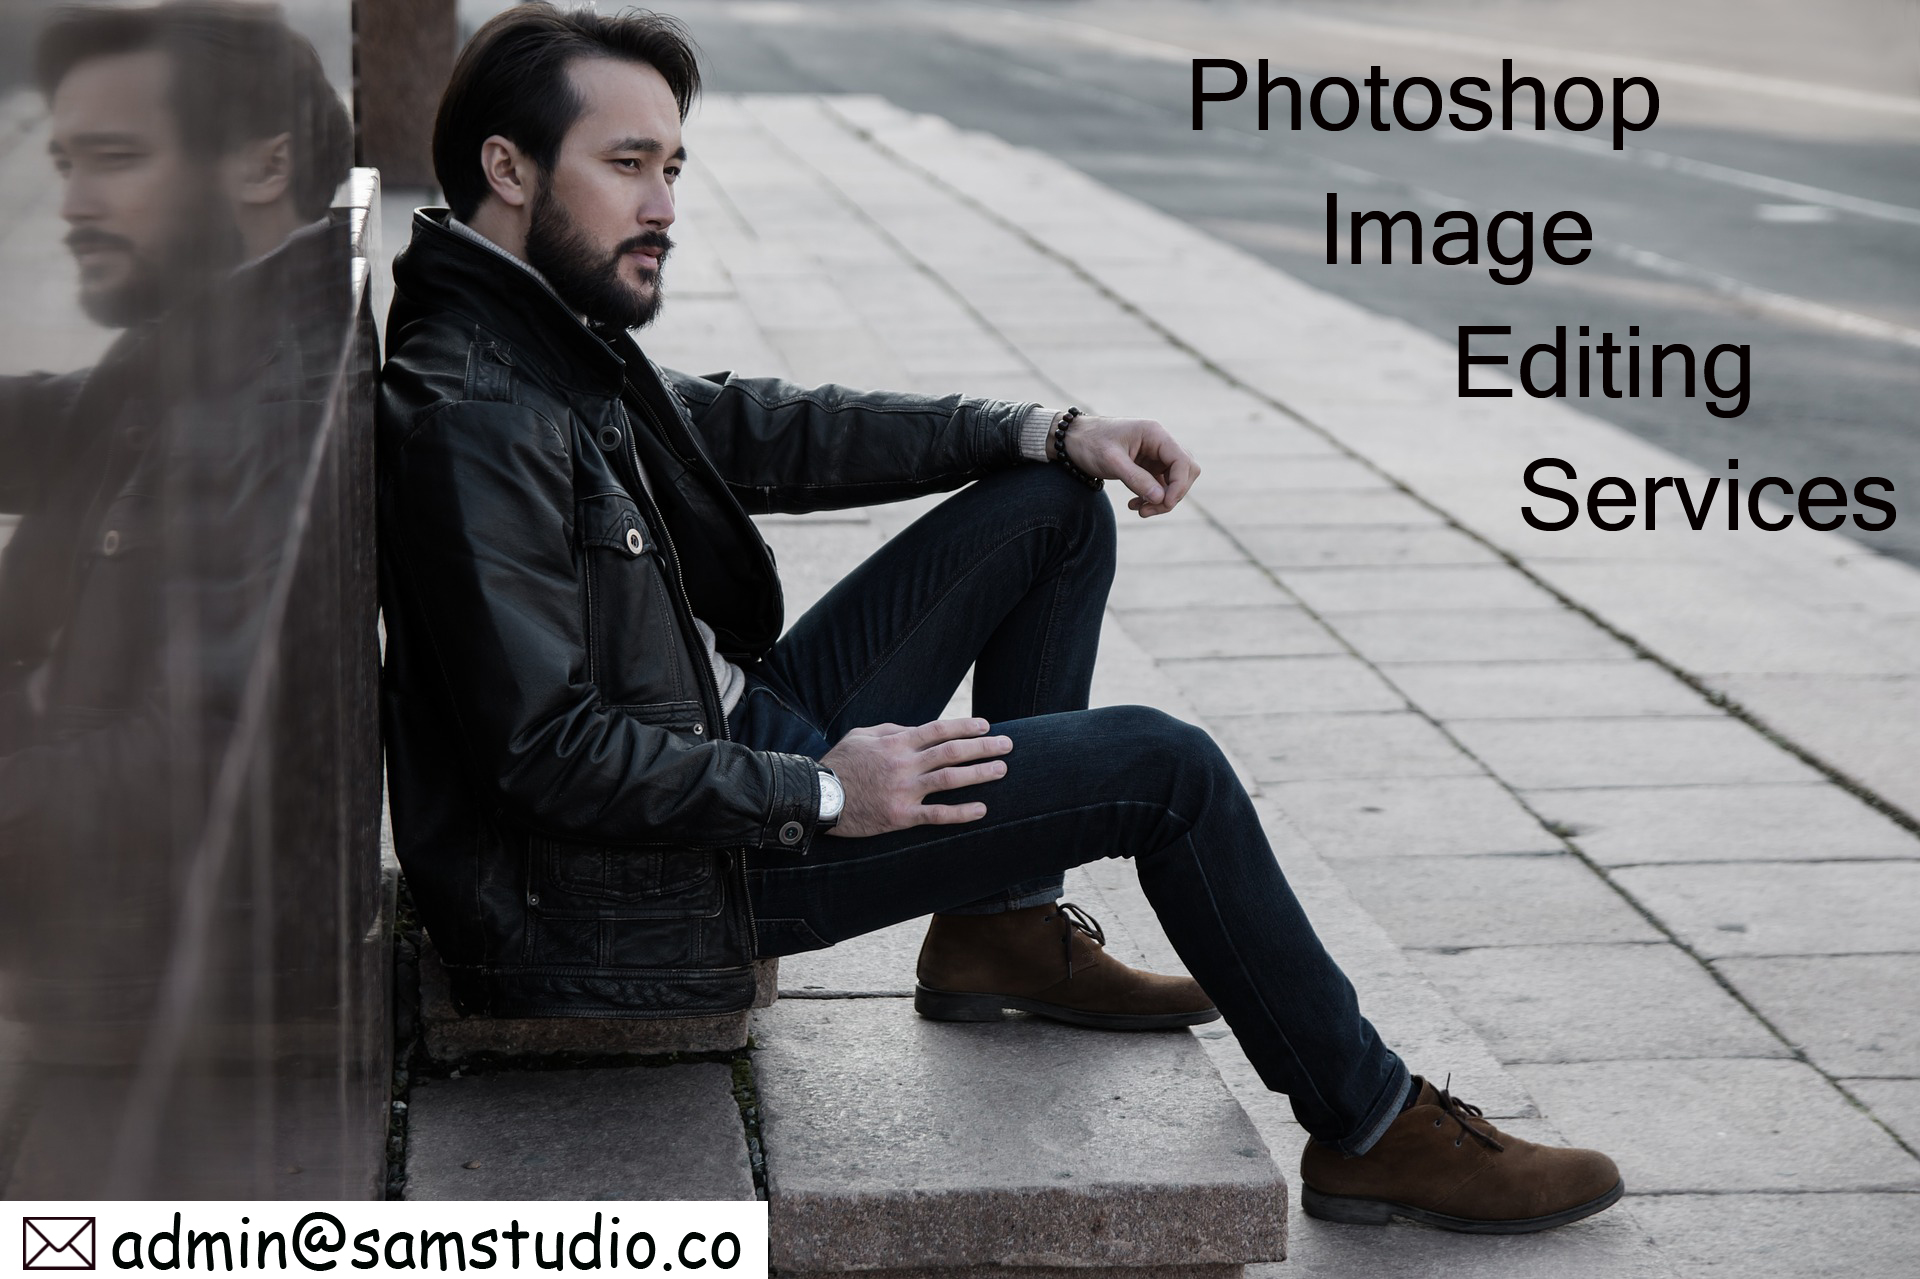 Professional Photoshop Image Editing Services | Outsource Image Editing Services